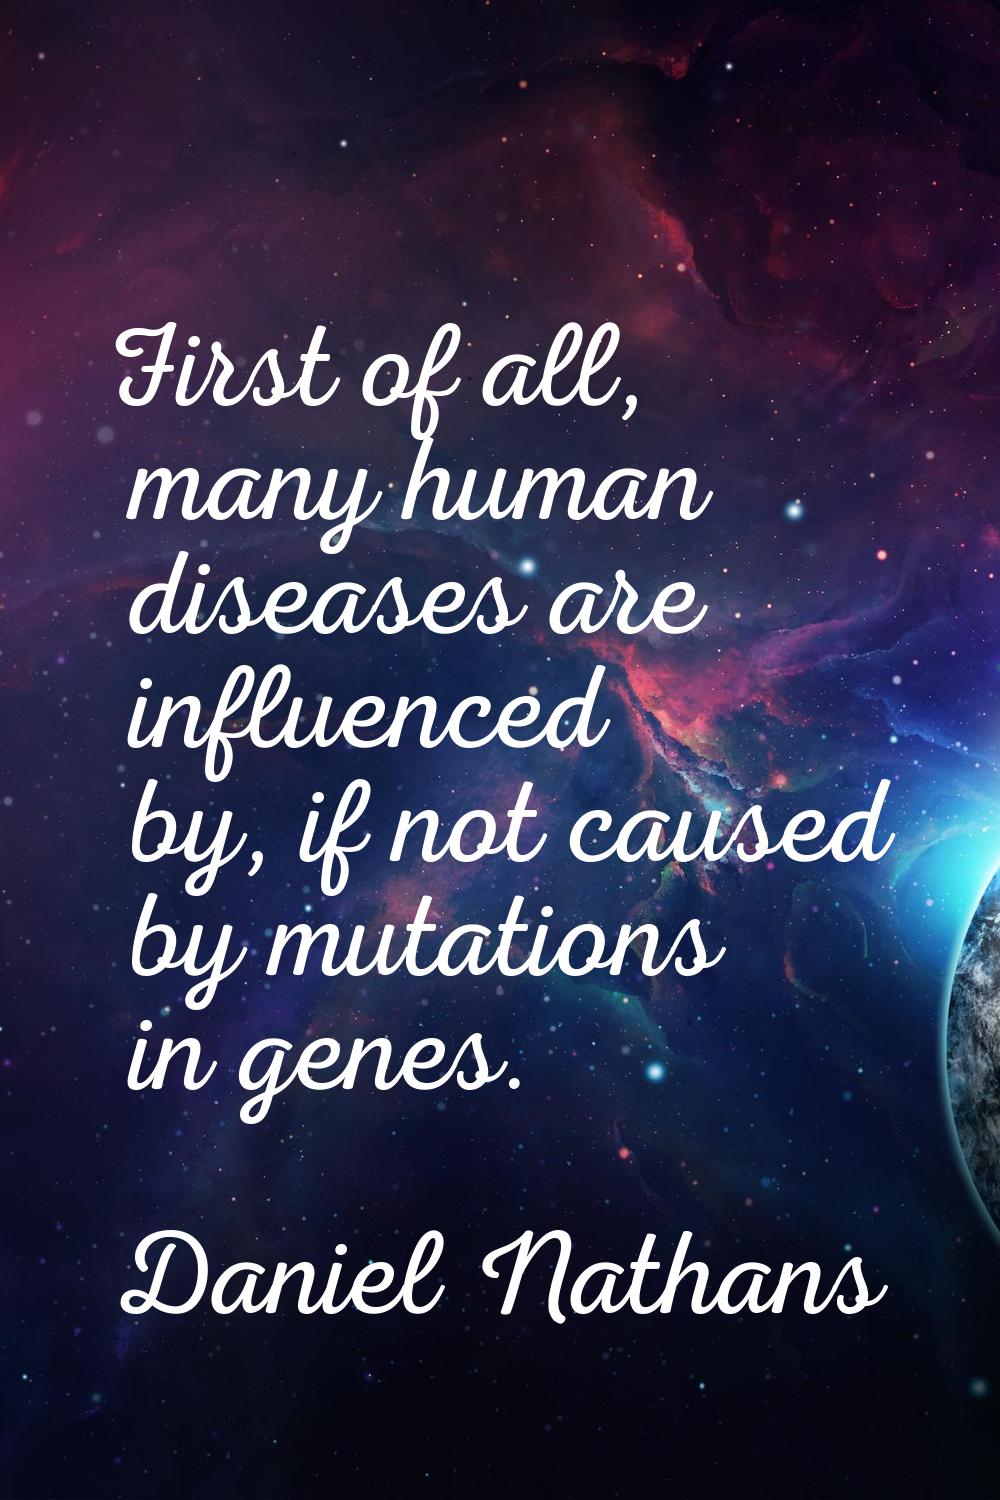 First of all, many human diseases are influenced by, if not caused by mutations in genes.